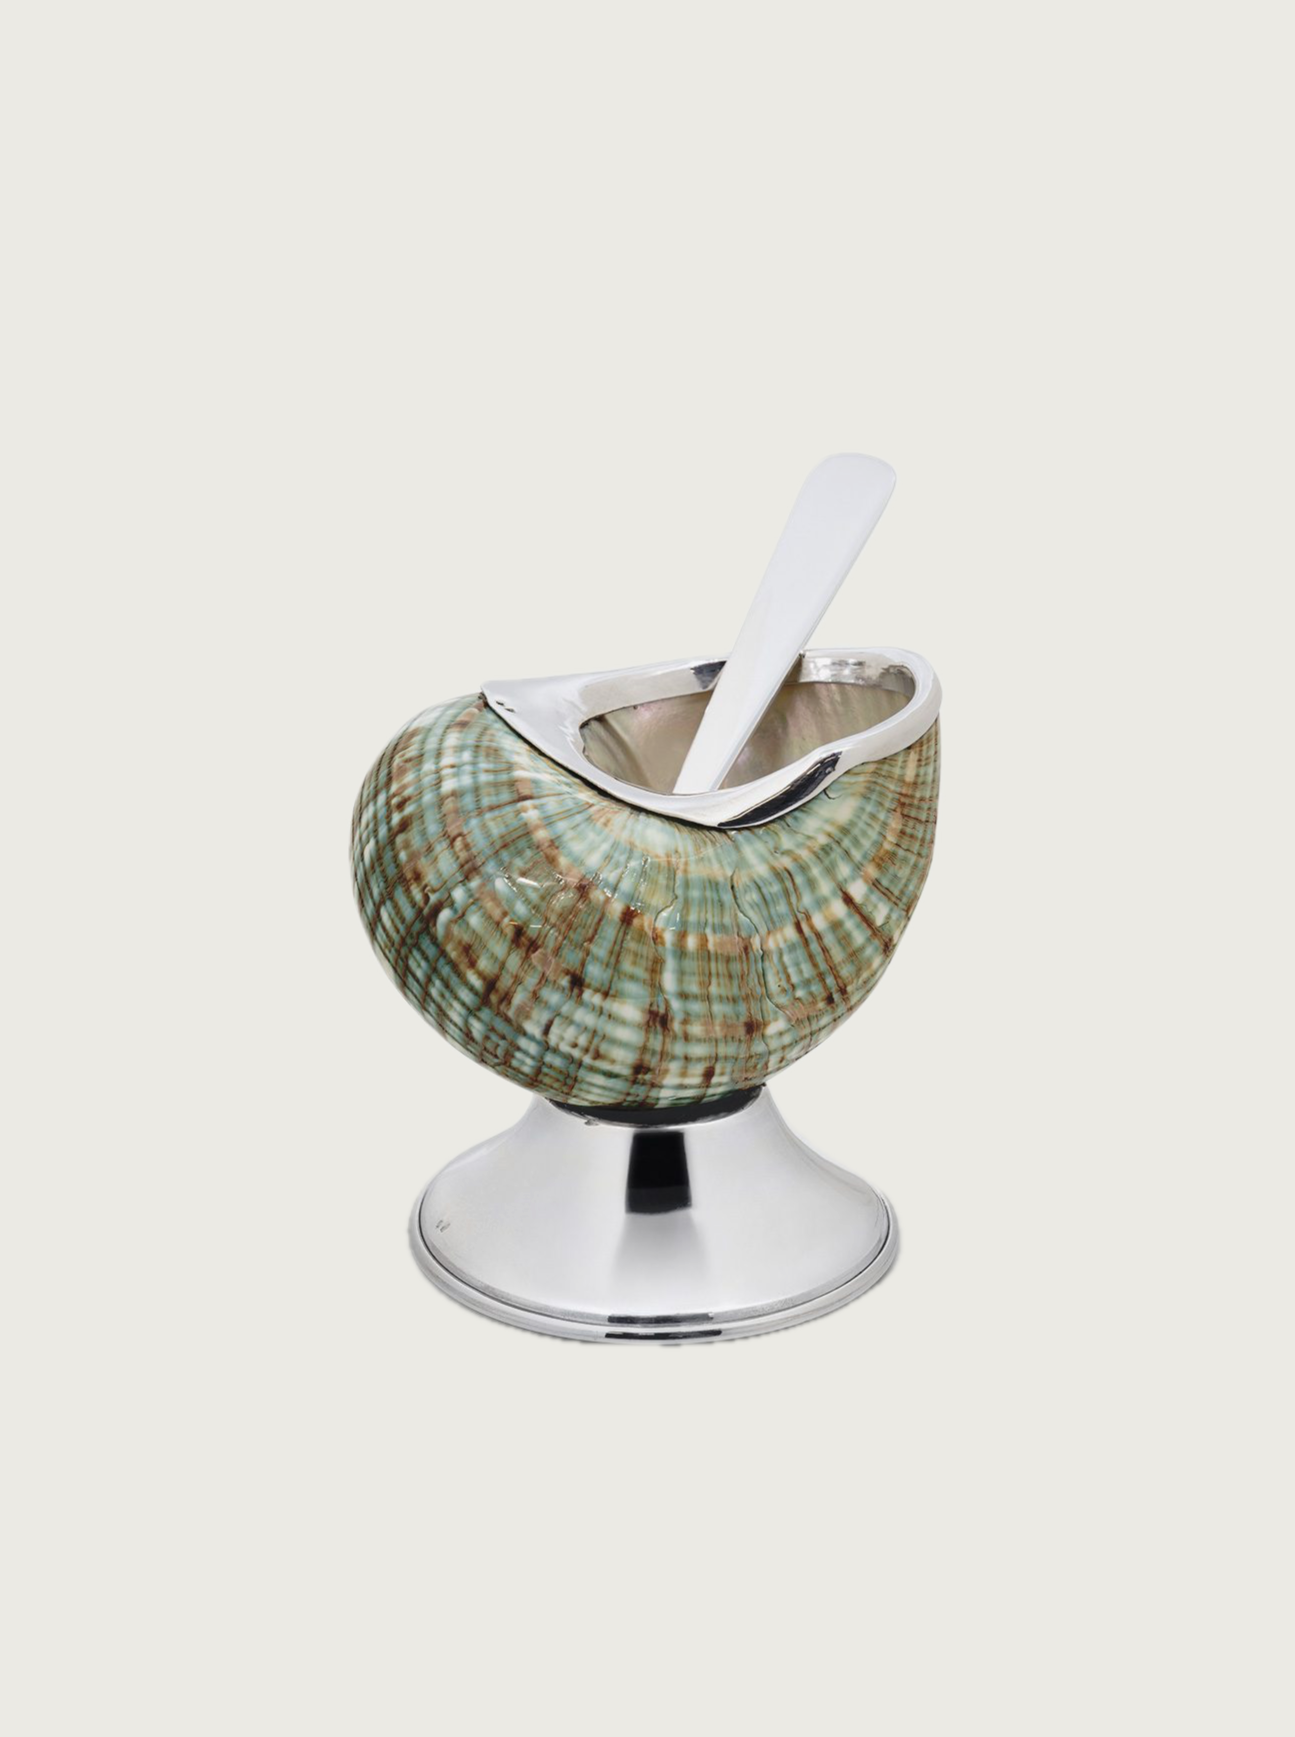 Jade Shell Sugar Bowl featuring a stunning green color and durable construction